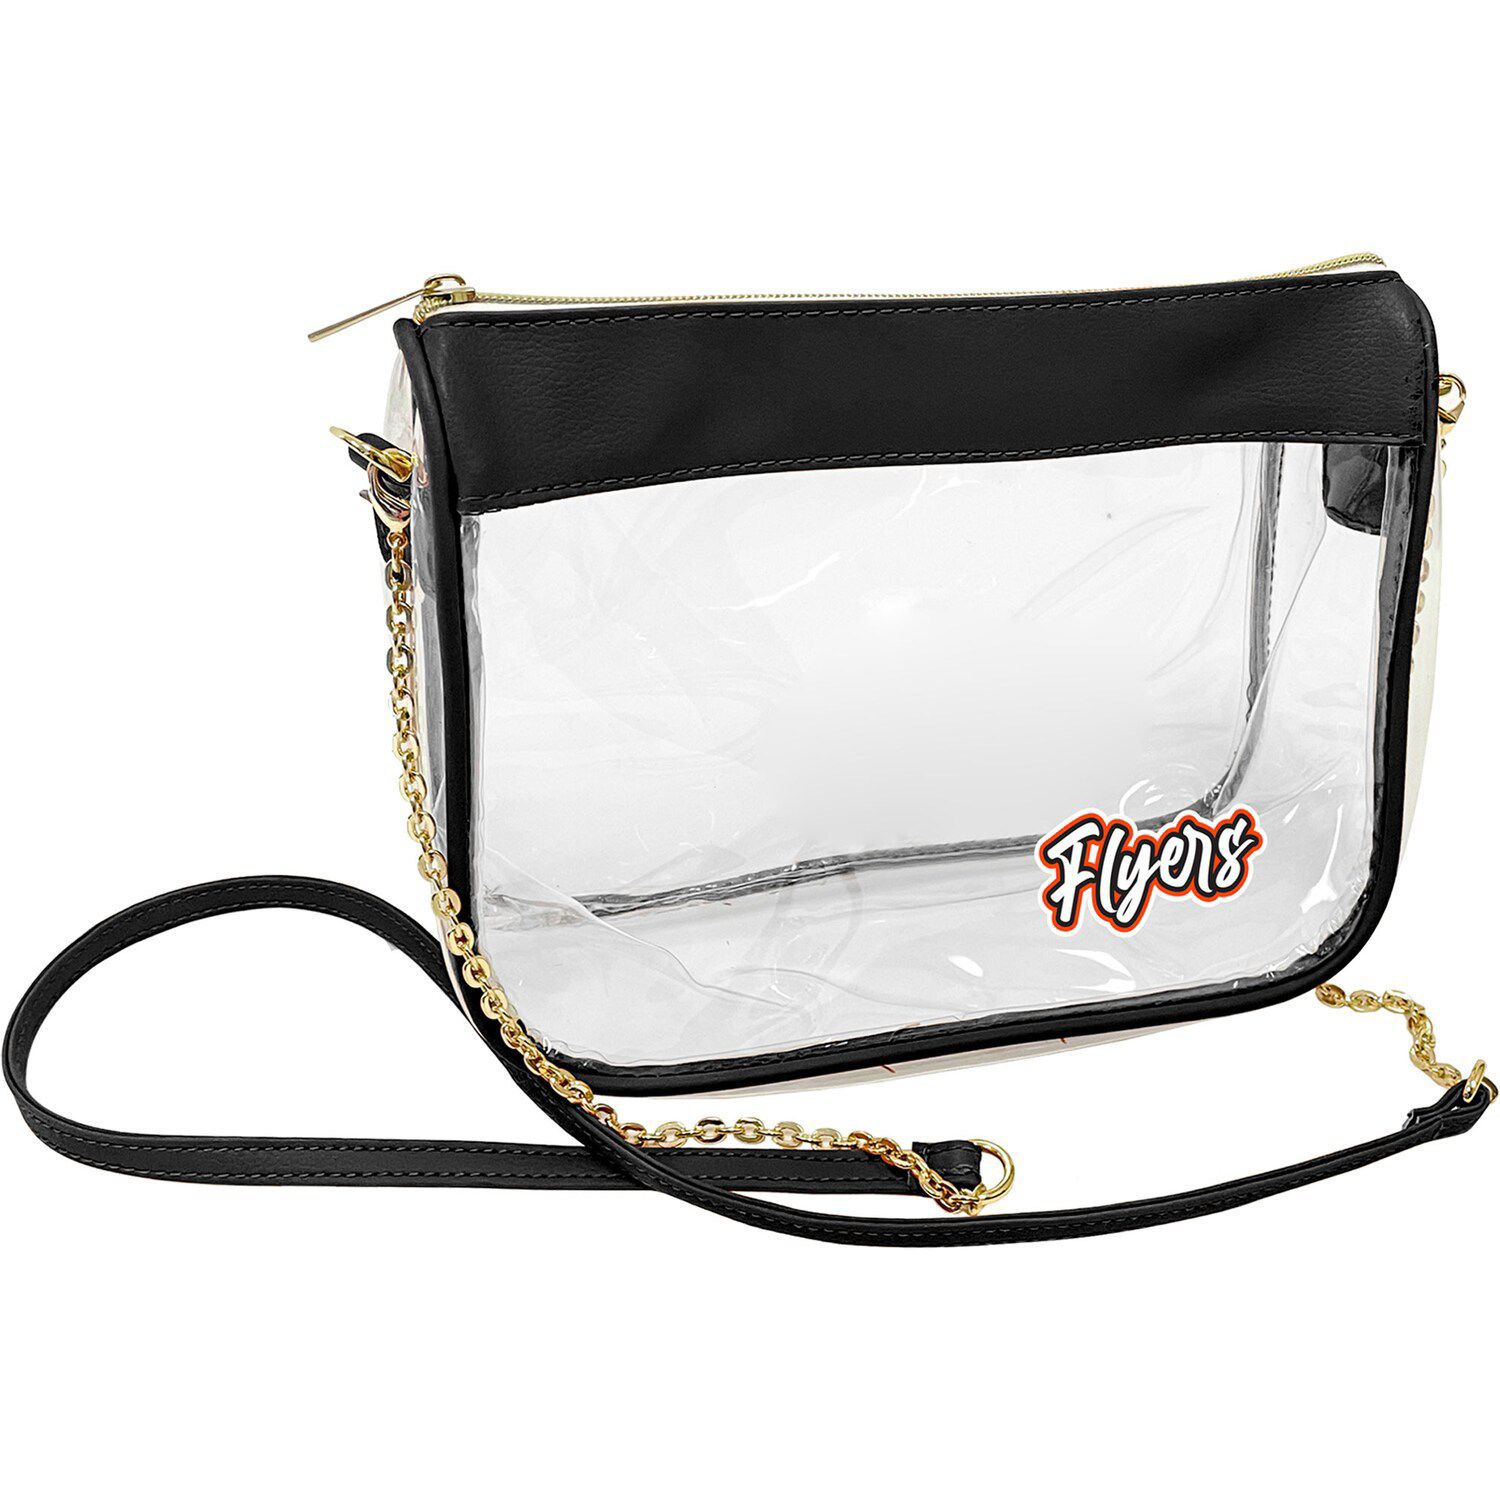 WJCD Clear Bag Stadium Approved PVC Concert Clear Purse Clear Crossbody  Purse Bag clear bags for women,With front pocket